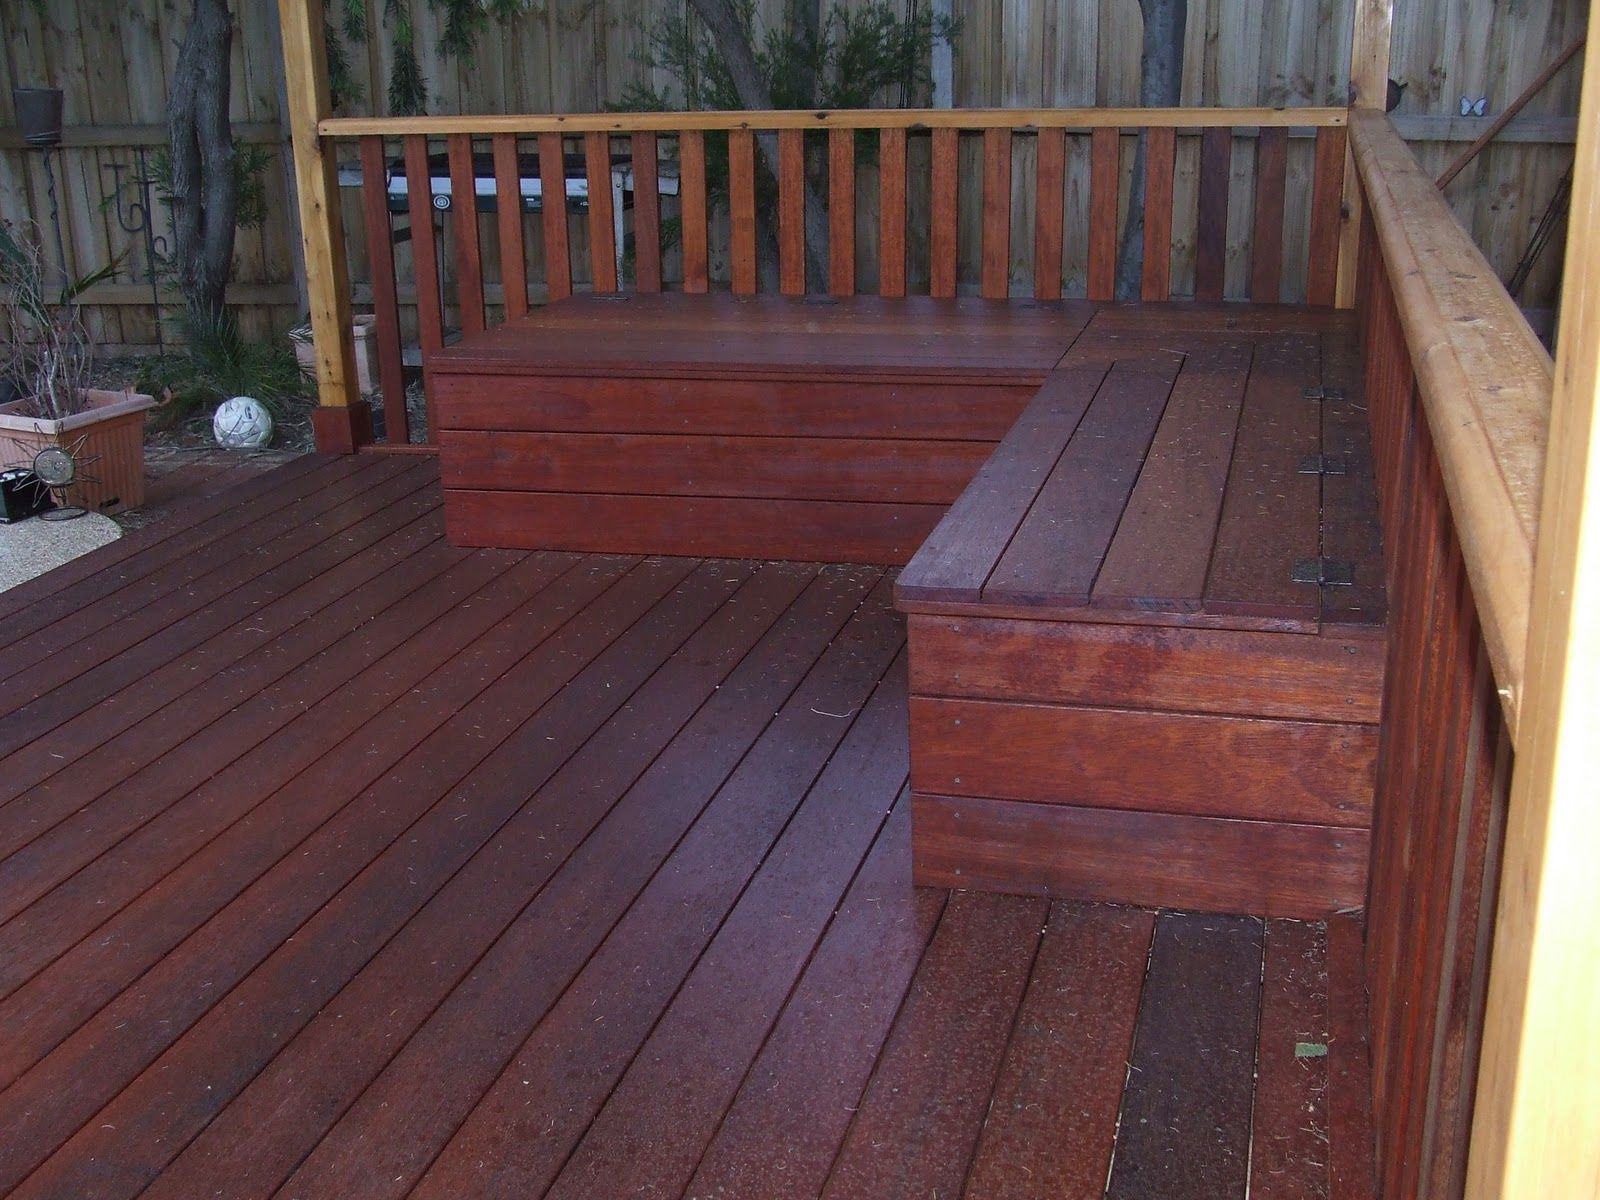 L Shaped Bench With Storage
 l shaped wood decking seating with storage Google Search